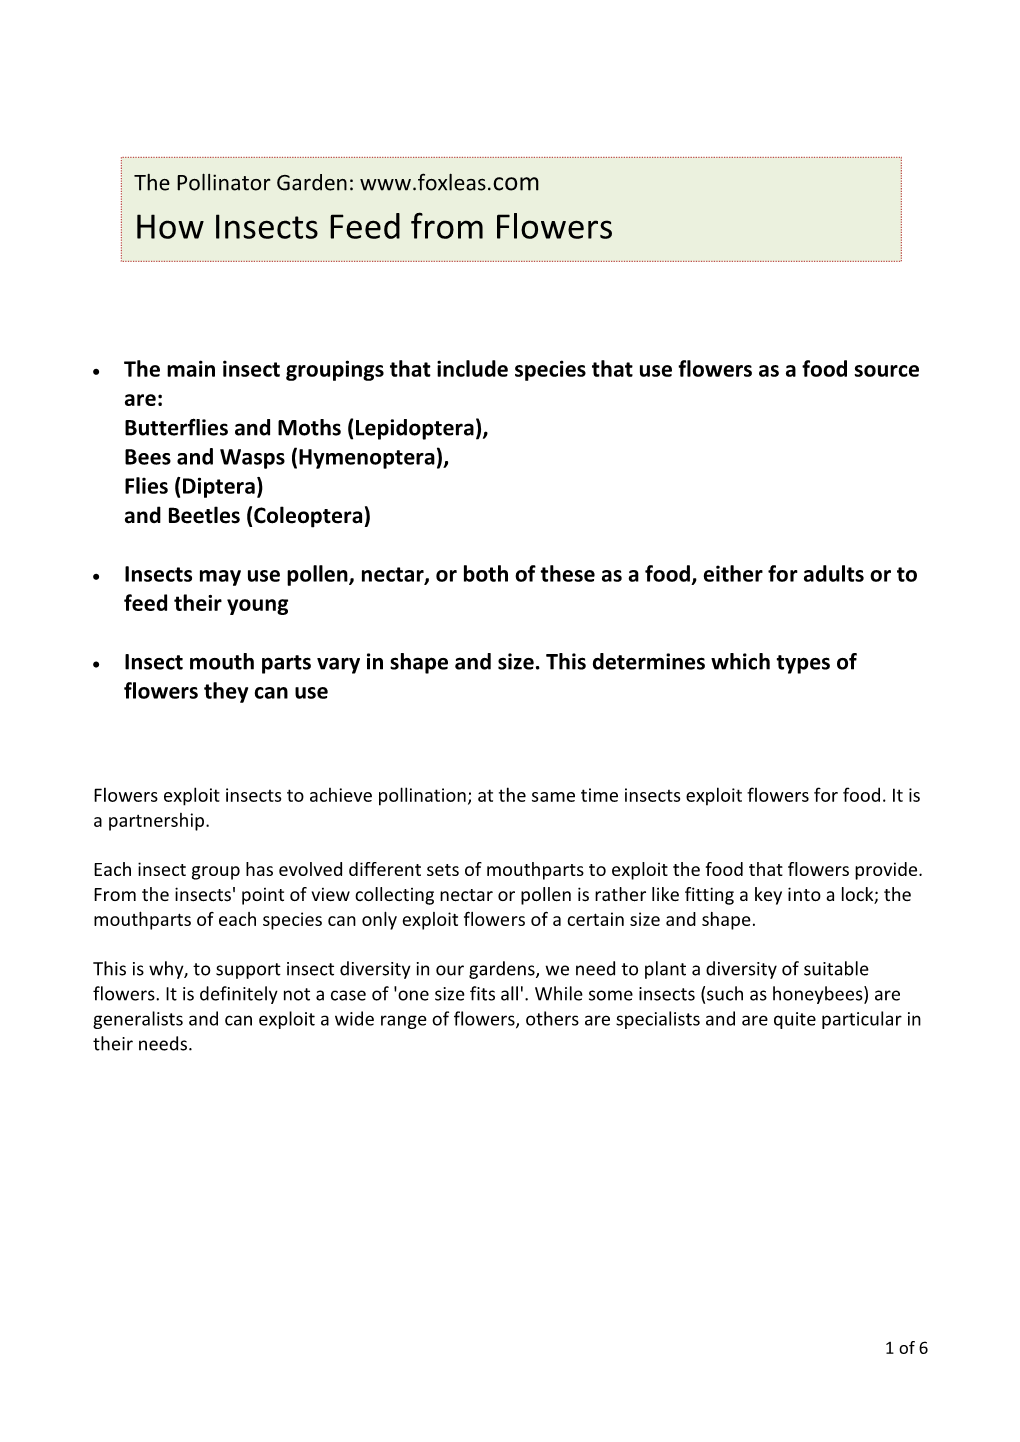 How Insects Feed from Flowers